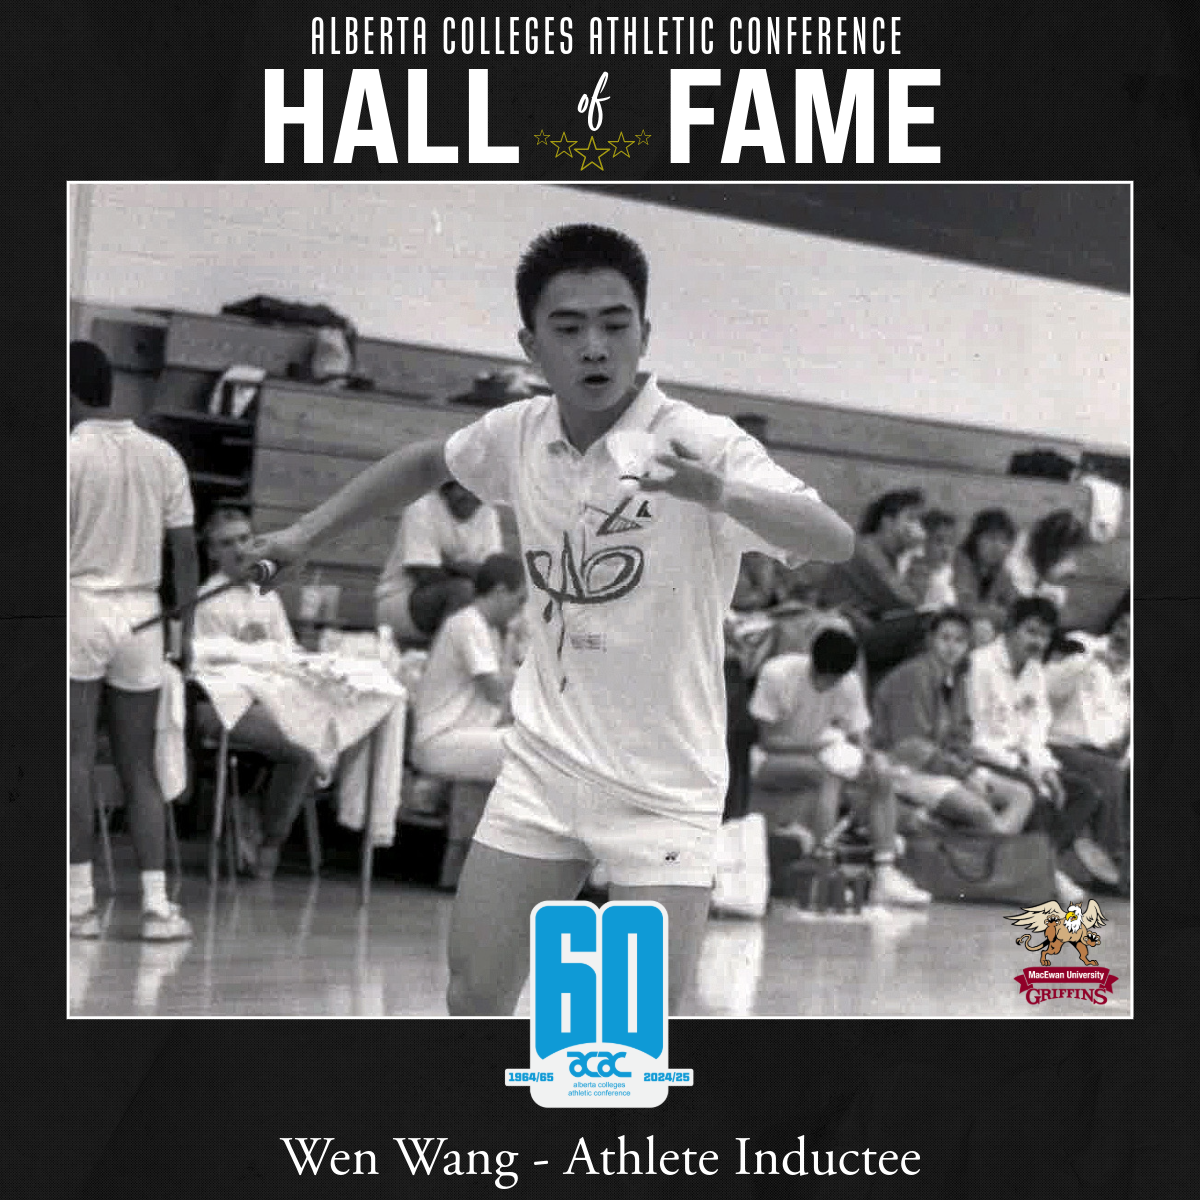 ACAC Hall of Fame Athlete Inductee: Wen Wang